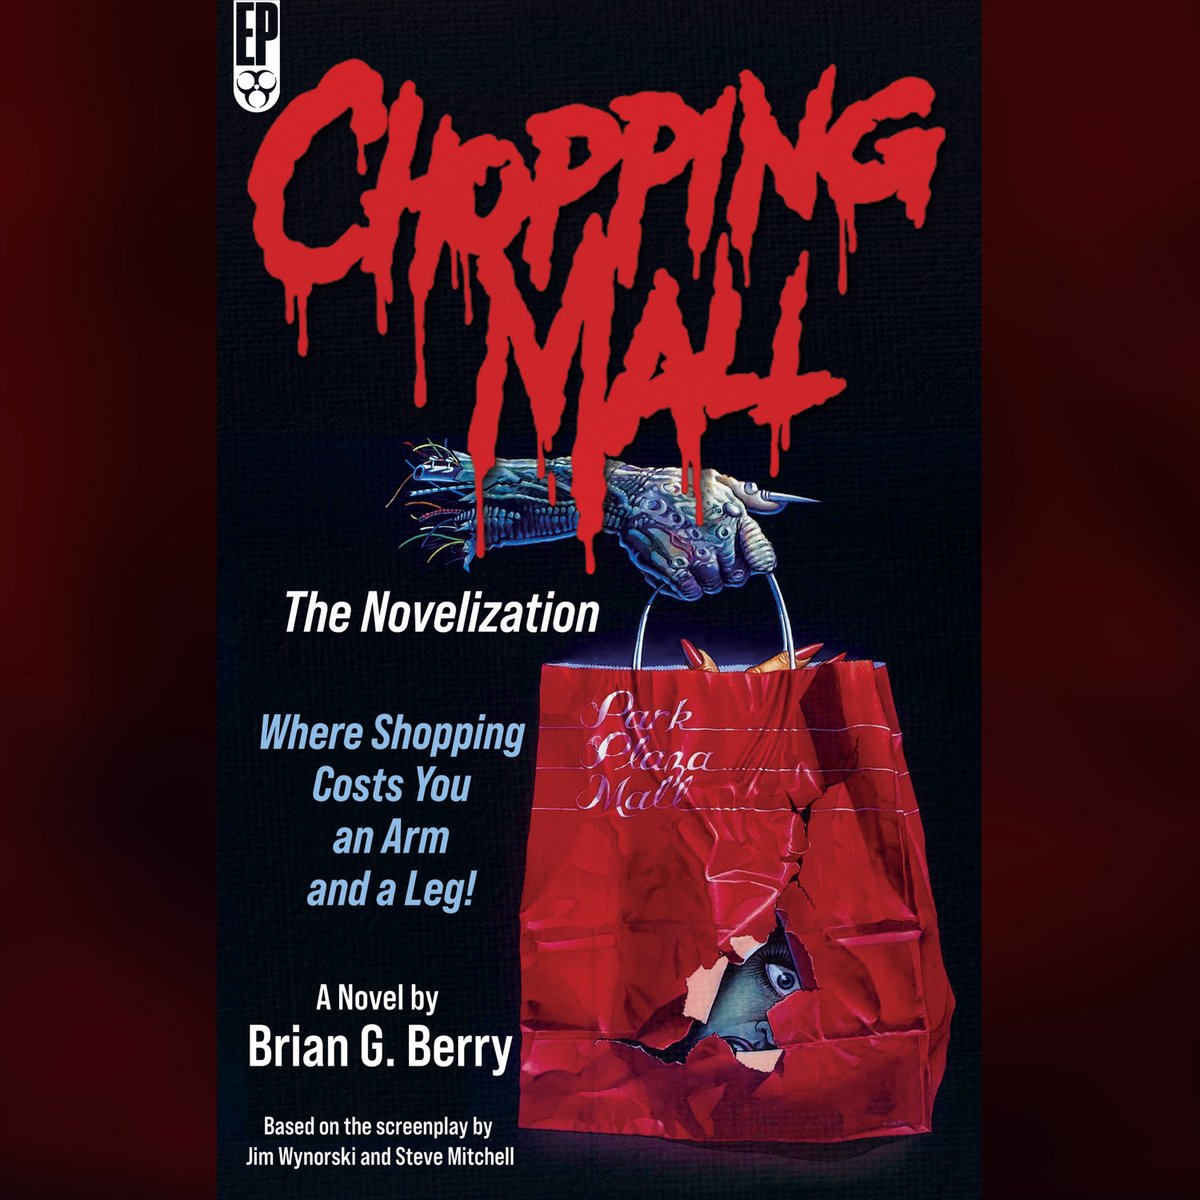 The @amazon Kindle version of CHOPPING MALL: THE NOVELIZATION is now available! amazon.com/dp/B0CW1BTK37 #choppingmall #ScreamFactory #ShoutFactory